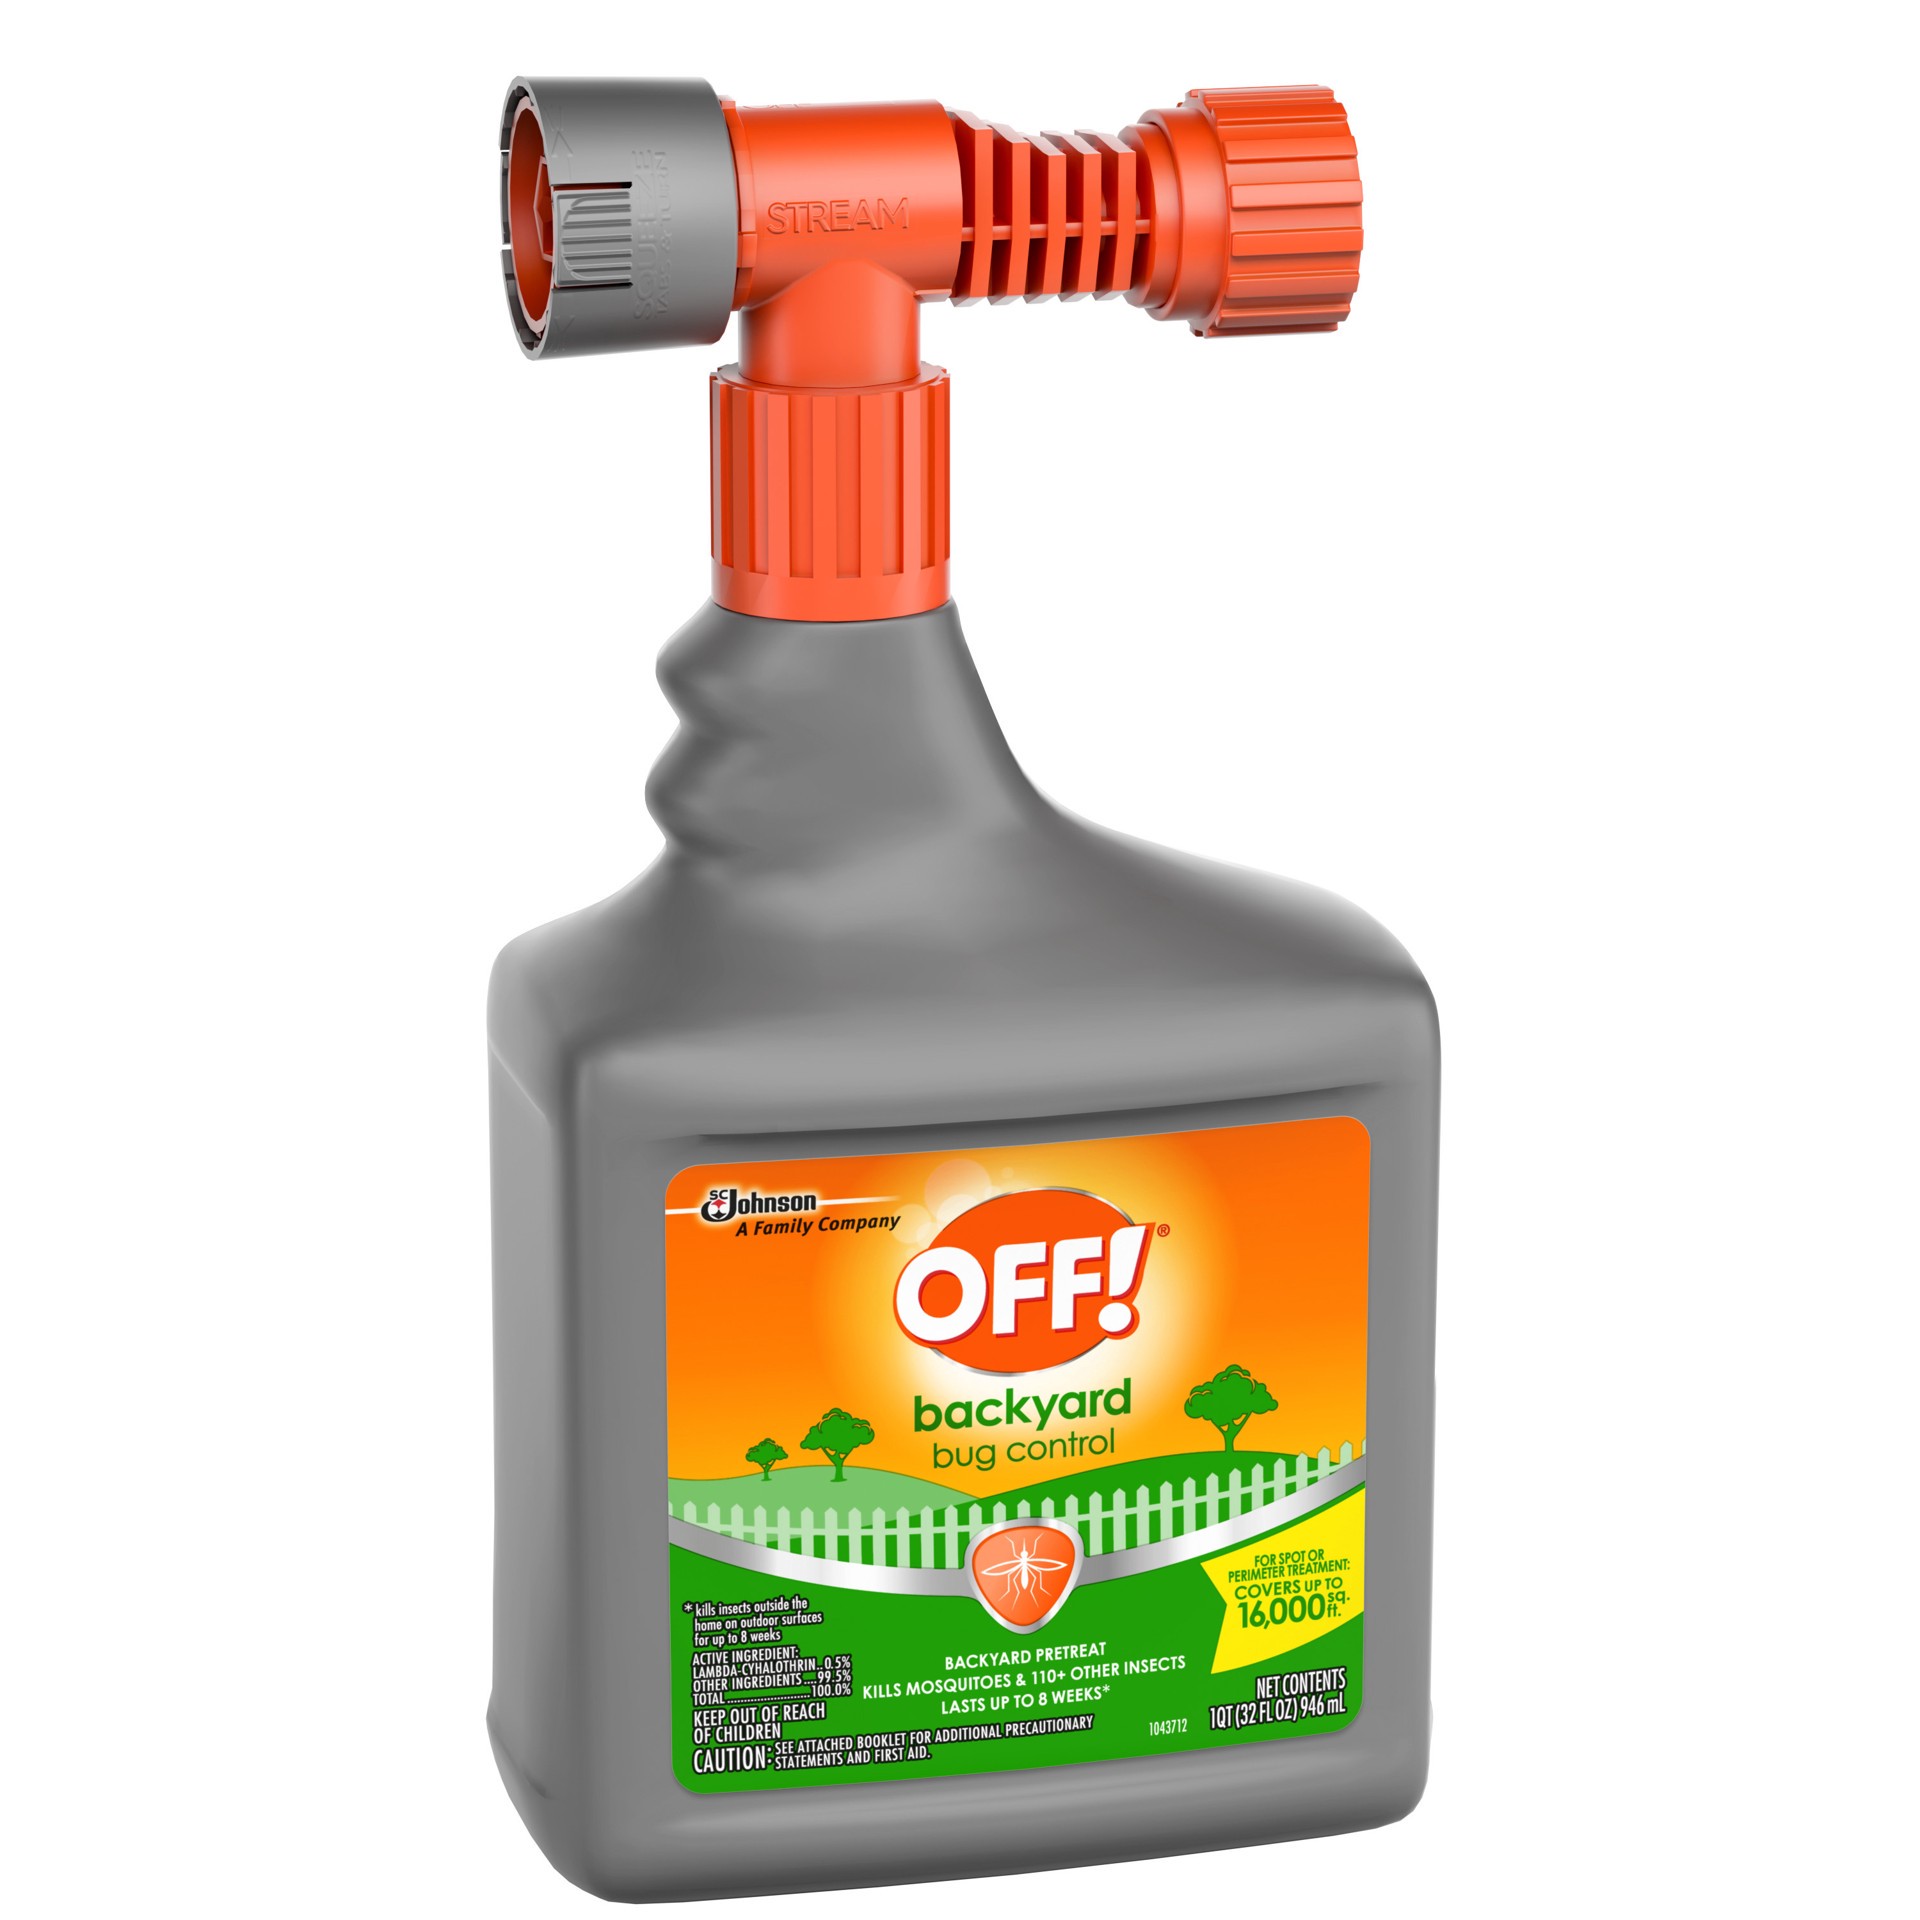 slide 3 of 5, OFF! Backyard Bug Control Pretreat, 32 oz, 1 CT, Outdoor Bug Treatment, Covers up to 16,000 sq. ft., Kills for up to 8 Weeks, With a Convenient Hose Connection, 32 fl oz